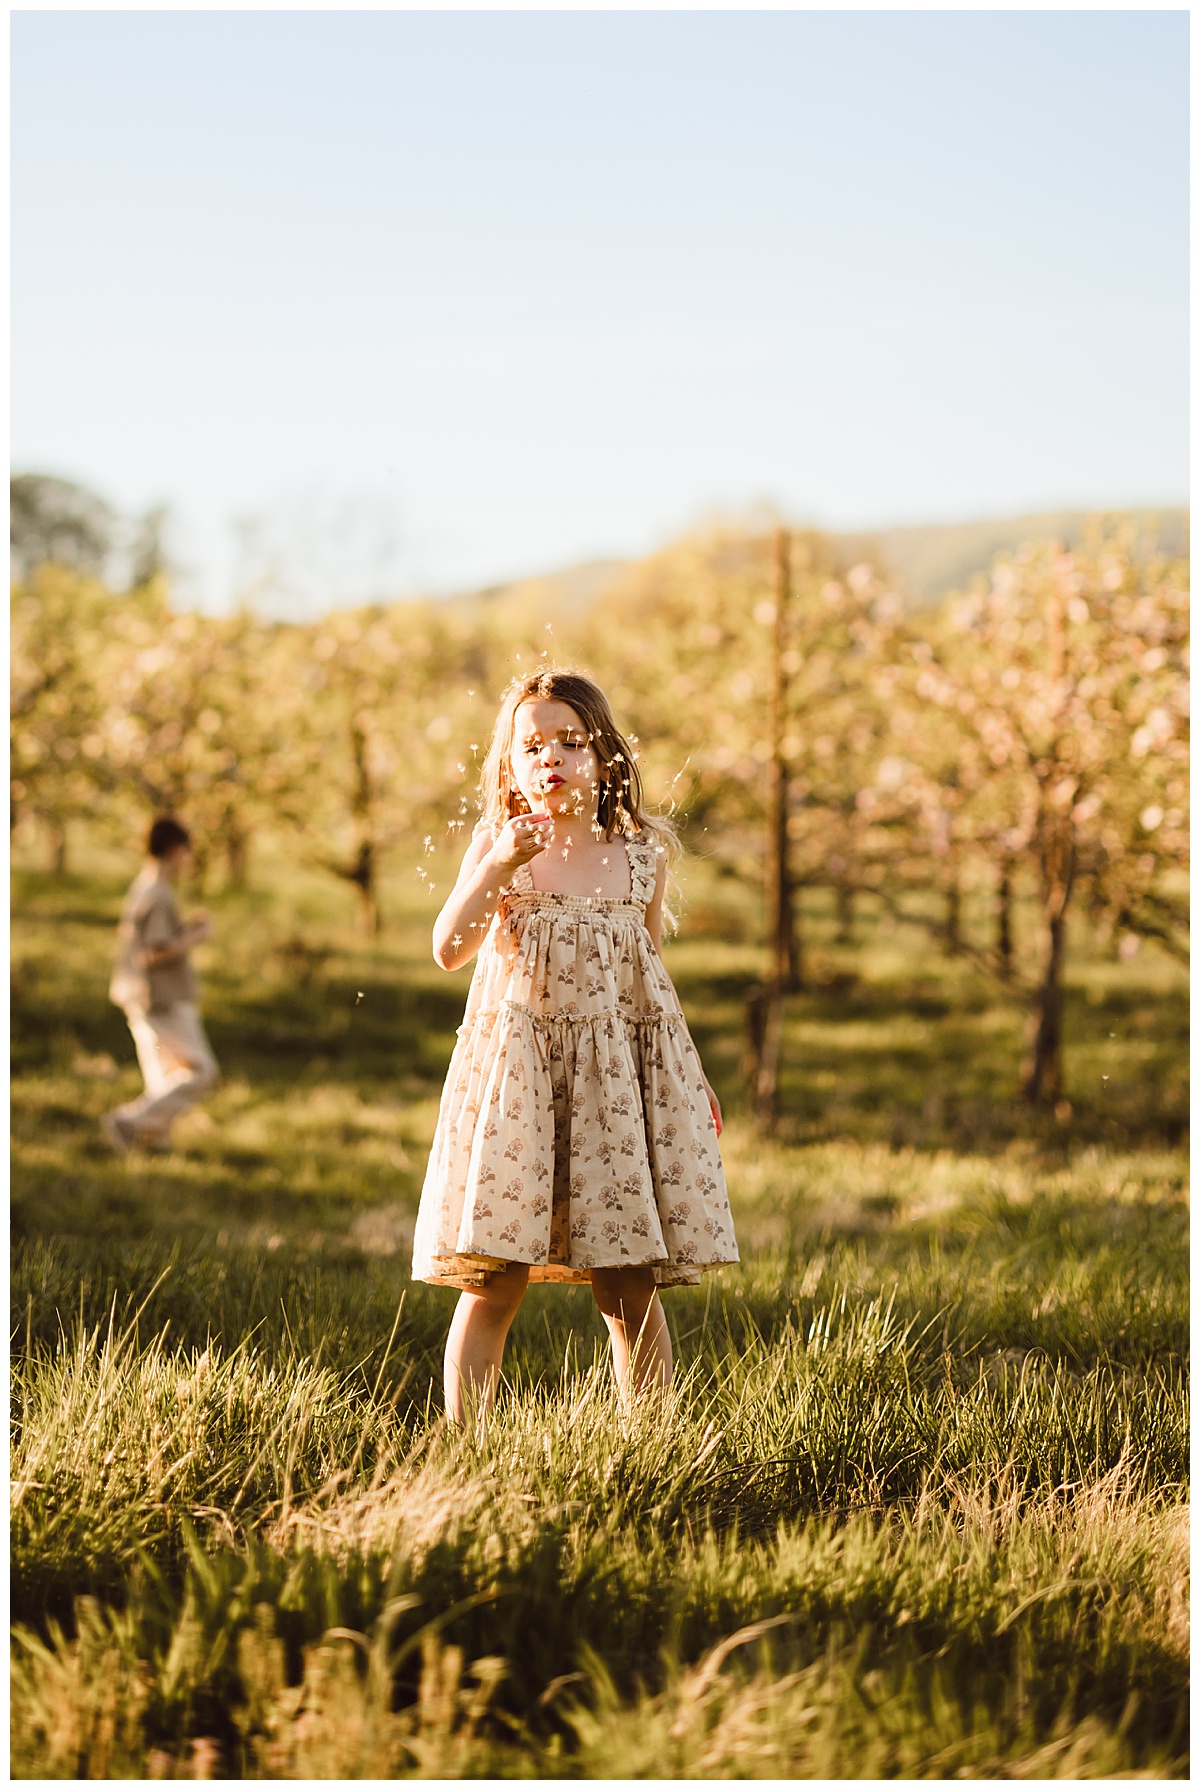 Young girls play in the grass for Virginia Family Photographer